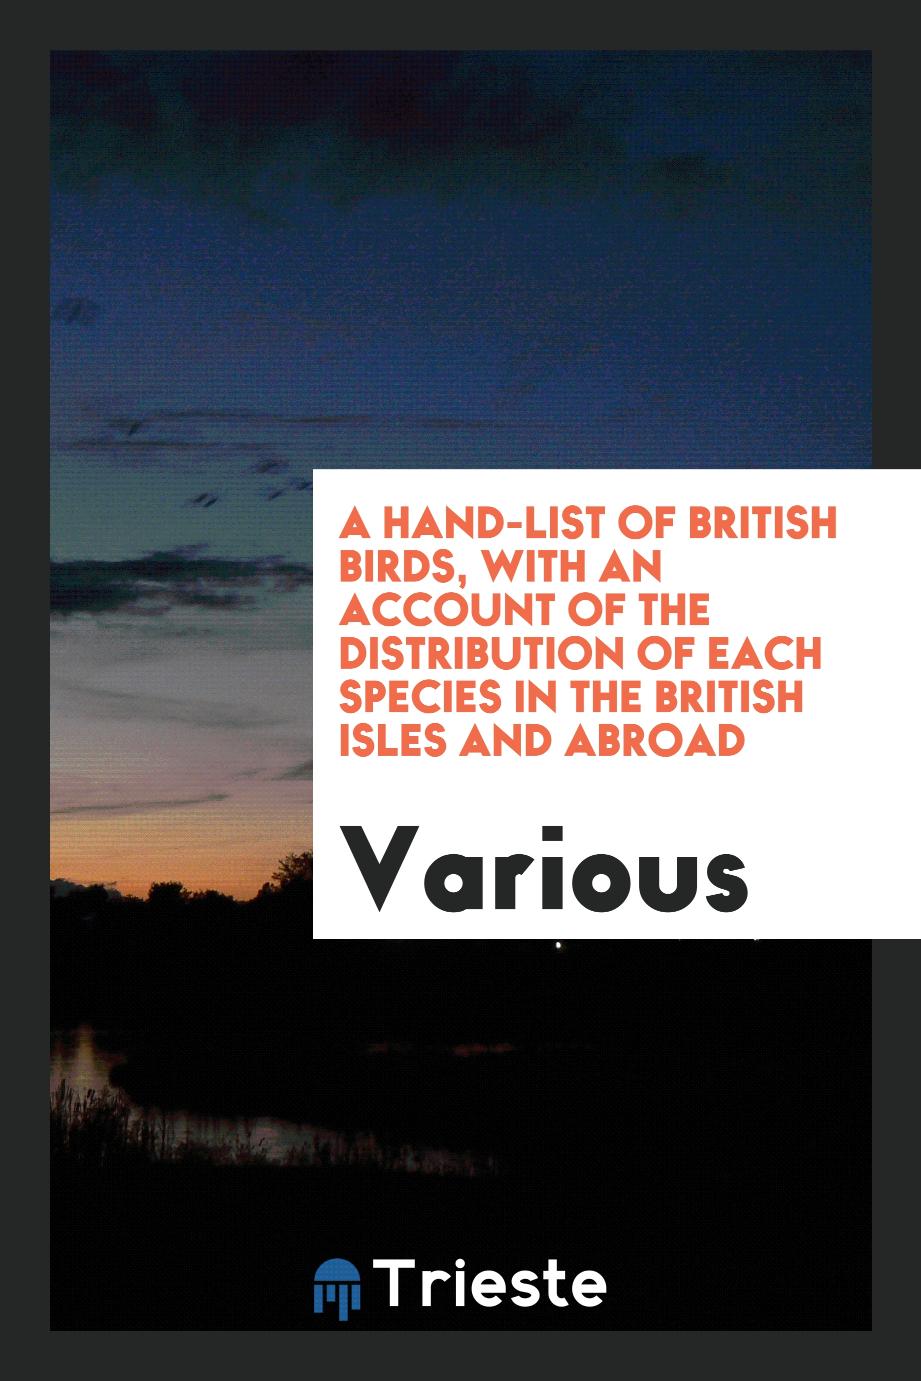 A hand-list of British birds, with an account of the distribution of each species in the British Isles and abroad